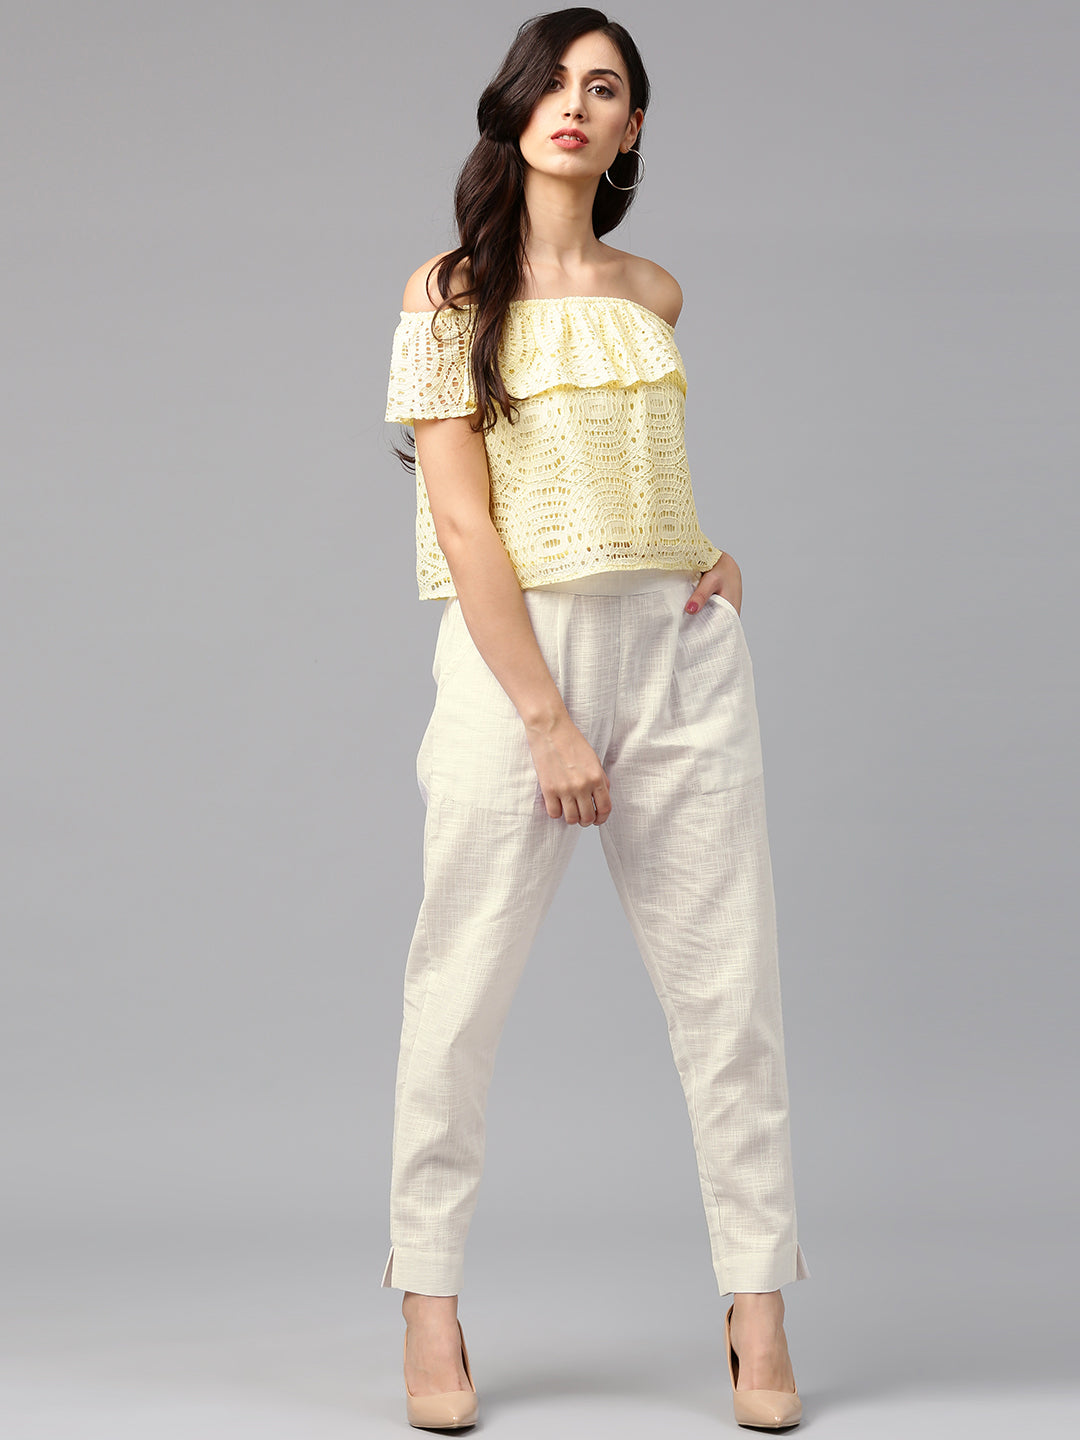 Kurti Pants | Link - https://www.gocolors.co.in/women/kurti-pants Comfy has  a new name, Kurti Pants and it looks uber stylish! So, no more waiting  because the ultimate... | By Go ColorsFacebook